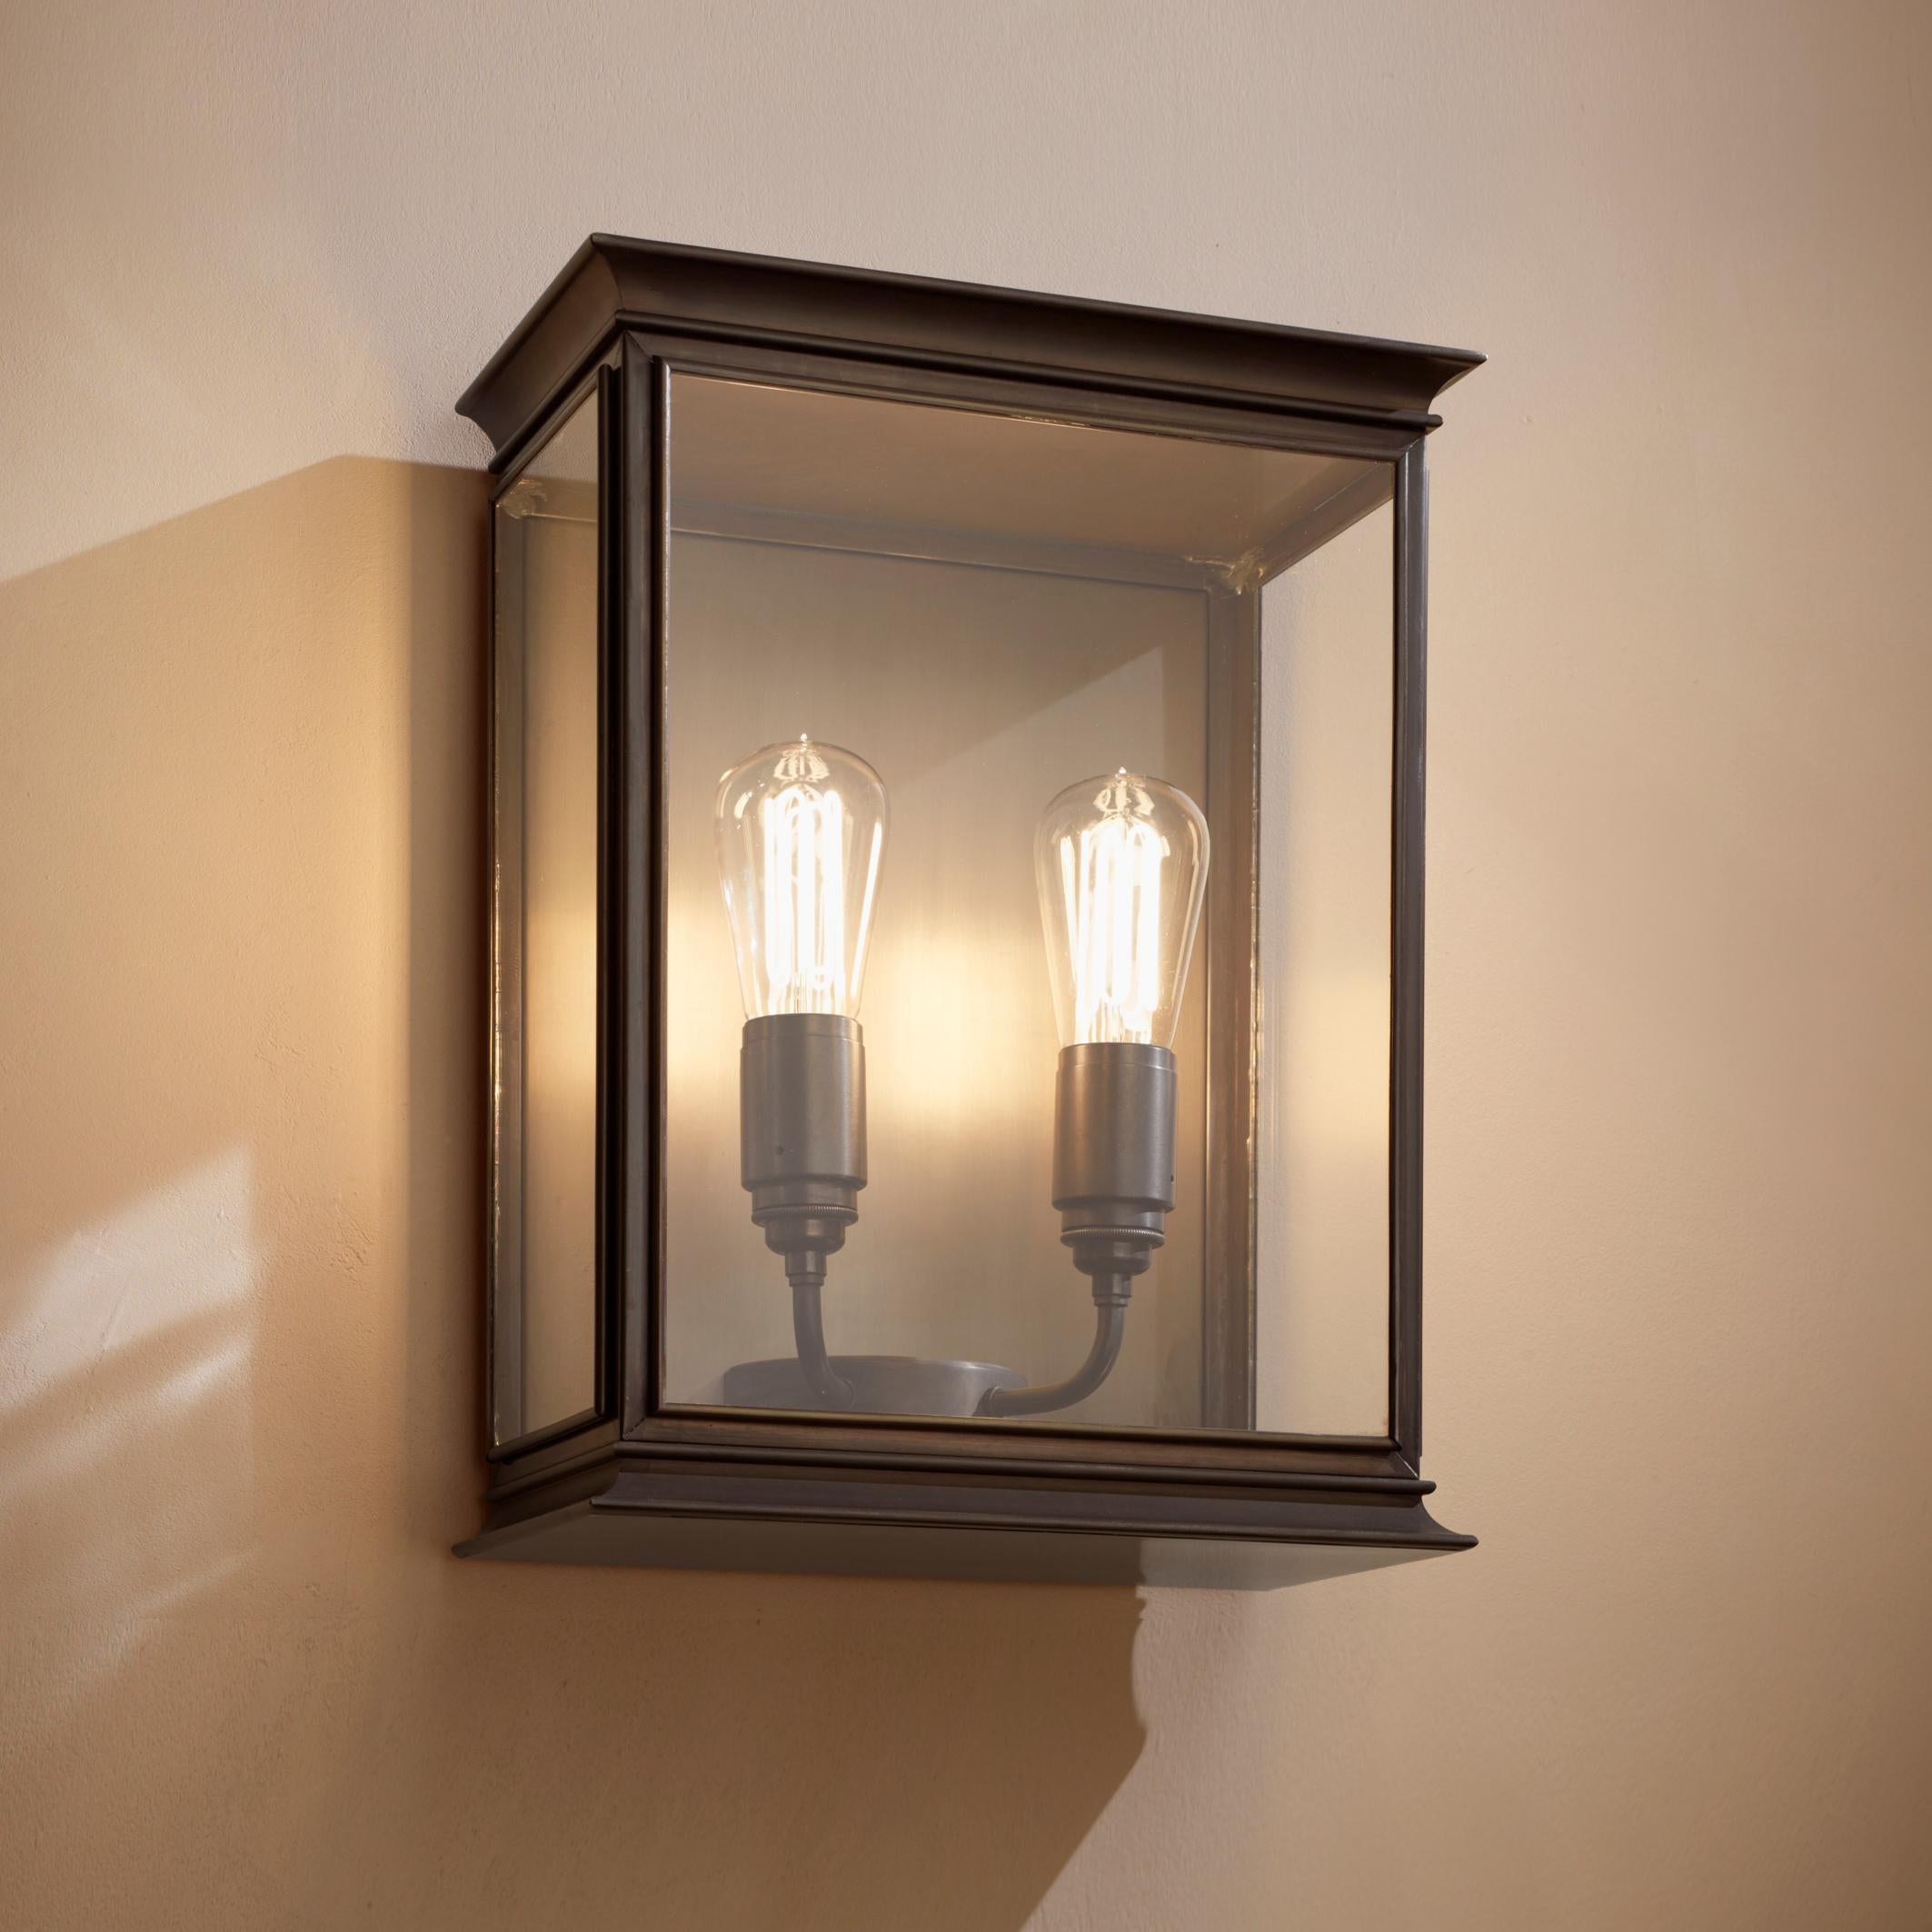 Wall light with decorative details on top and bottom in dark bronze, with outside fitted clear glass and spring closure. For indoor and outdoor use (IP44). Note that light bulb is not included.

Caret Squirrel Cage lamp 230V E27 2 x 7,7W 2300K. Main